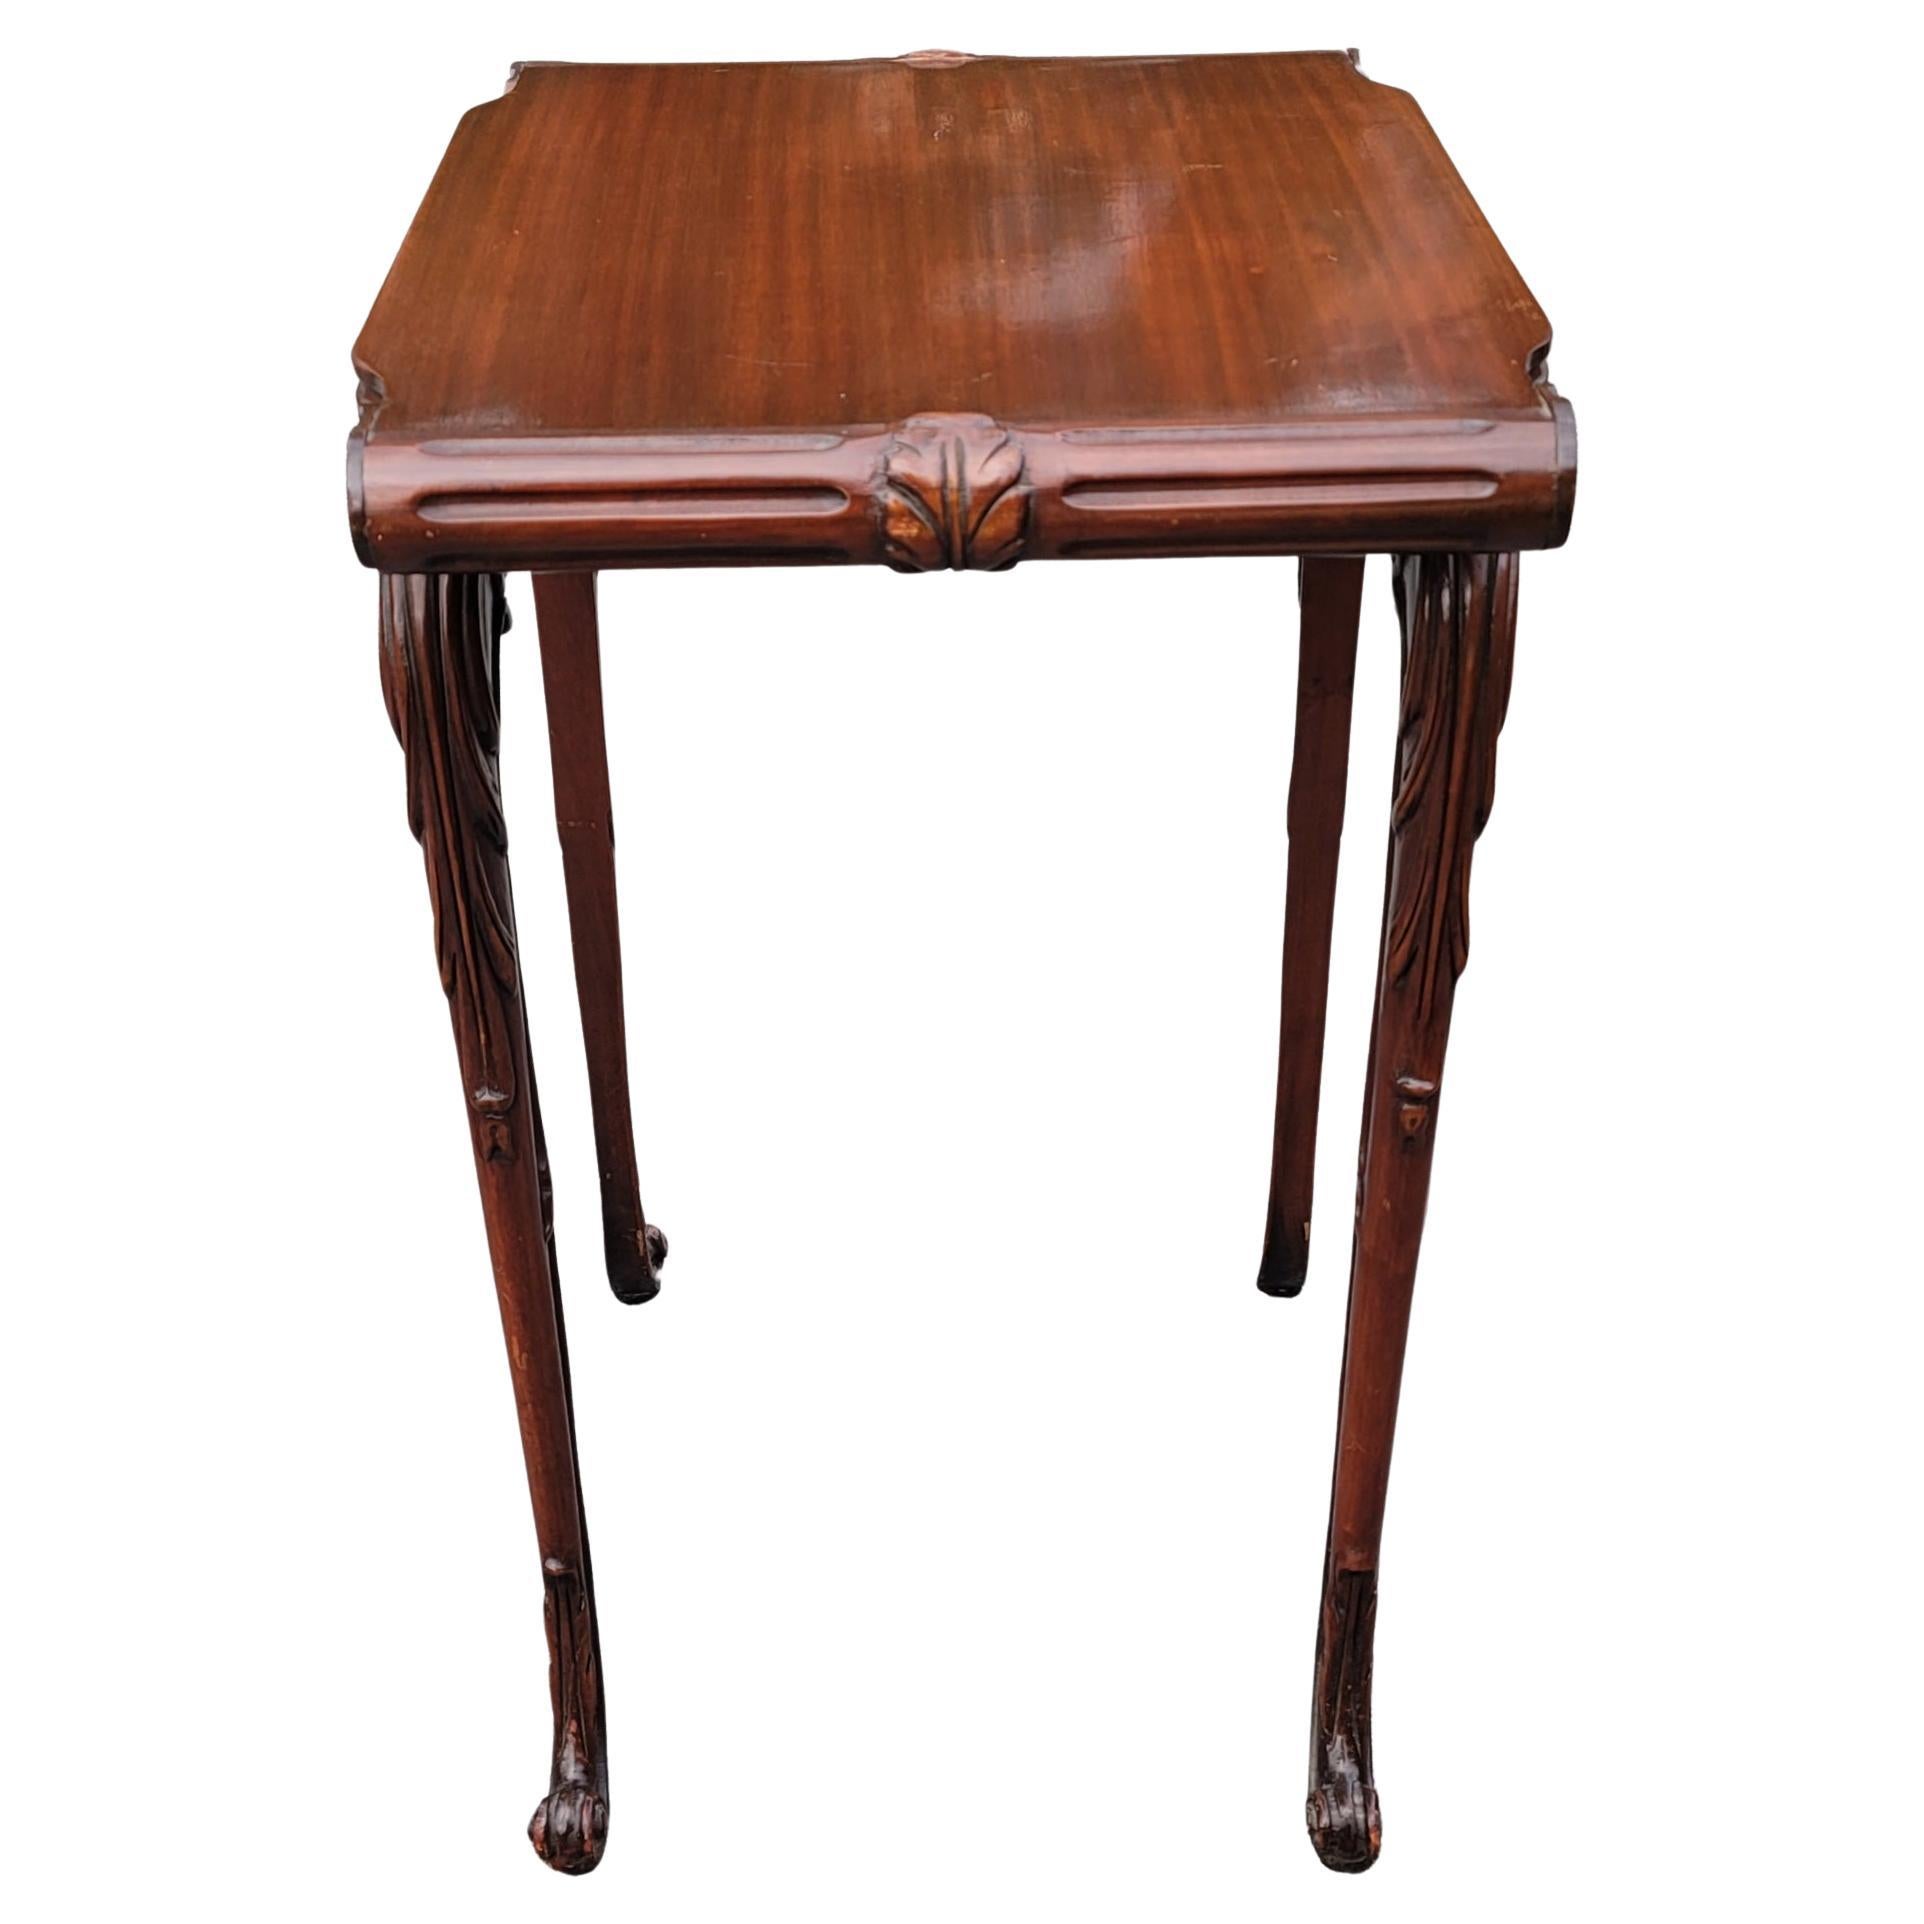 Unknown Pair of Chinese Chippendale Style Carved Mahogany End Tables For Sale